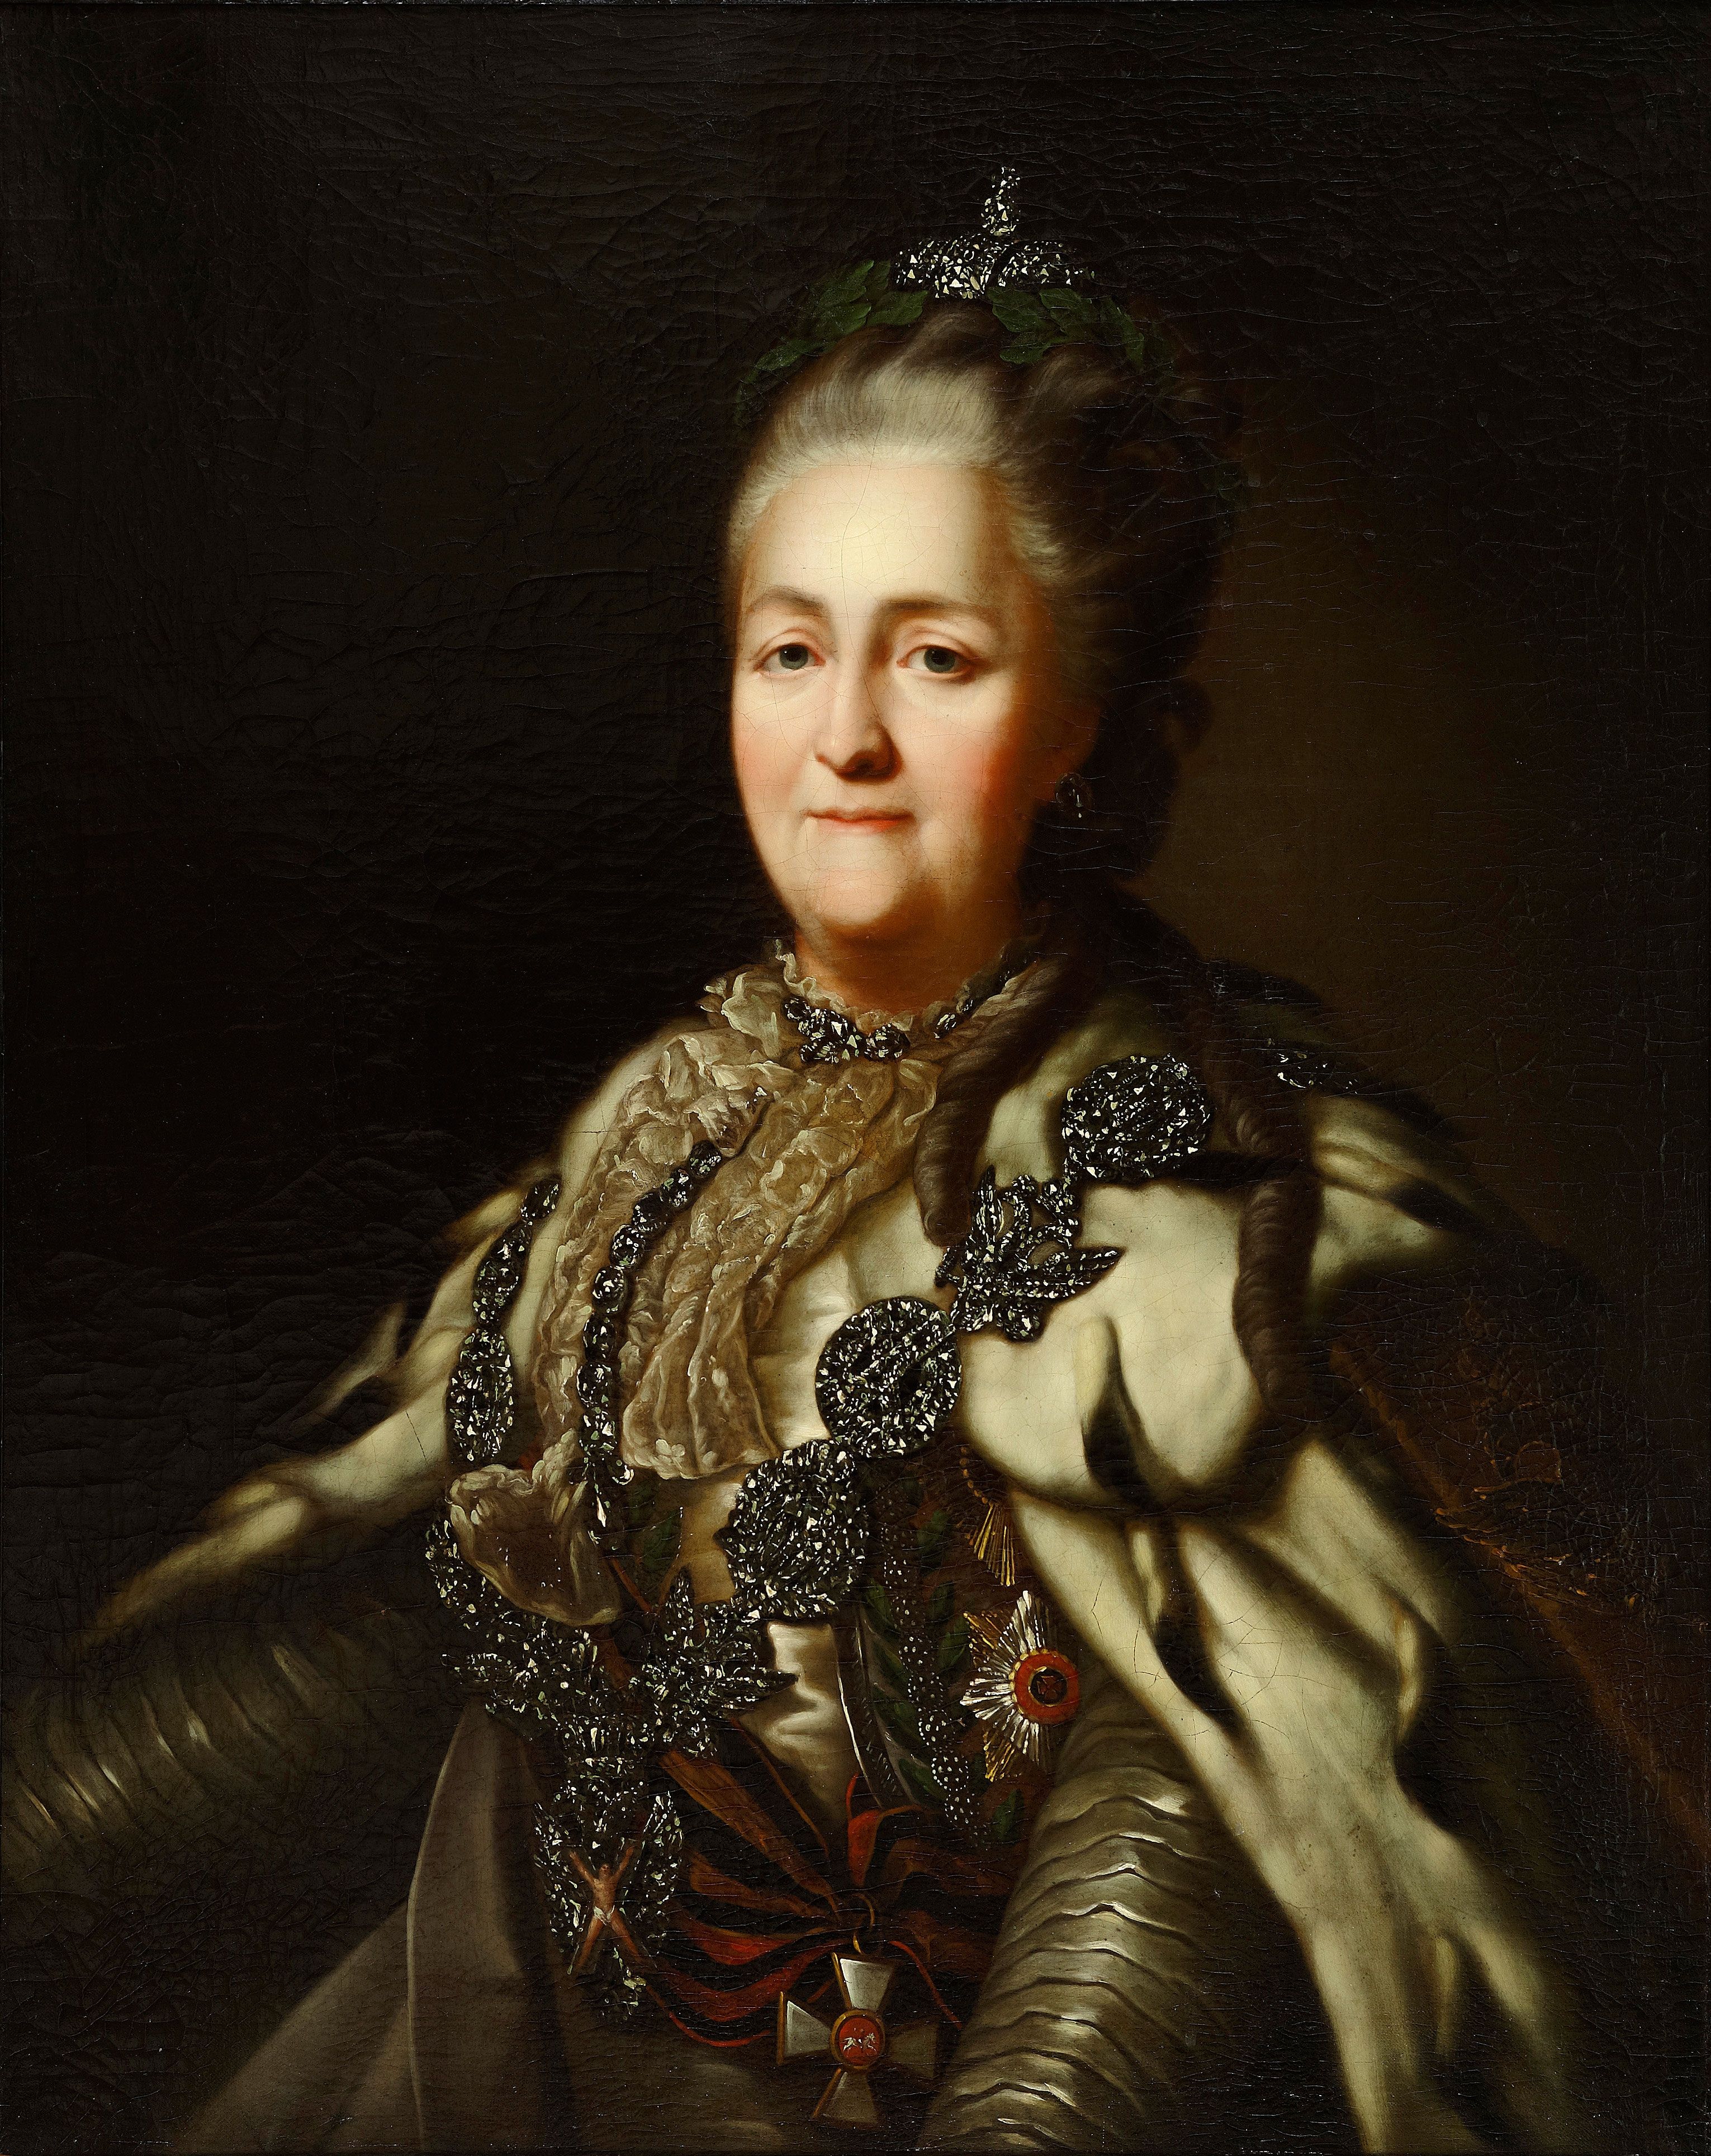 Russian Empress Catherine the Great adored cut steel jewelry. Her pieces were made by Michael Boulton. Catherine II, after 1782. Ekaterinburg Museum of Fine Arts. 